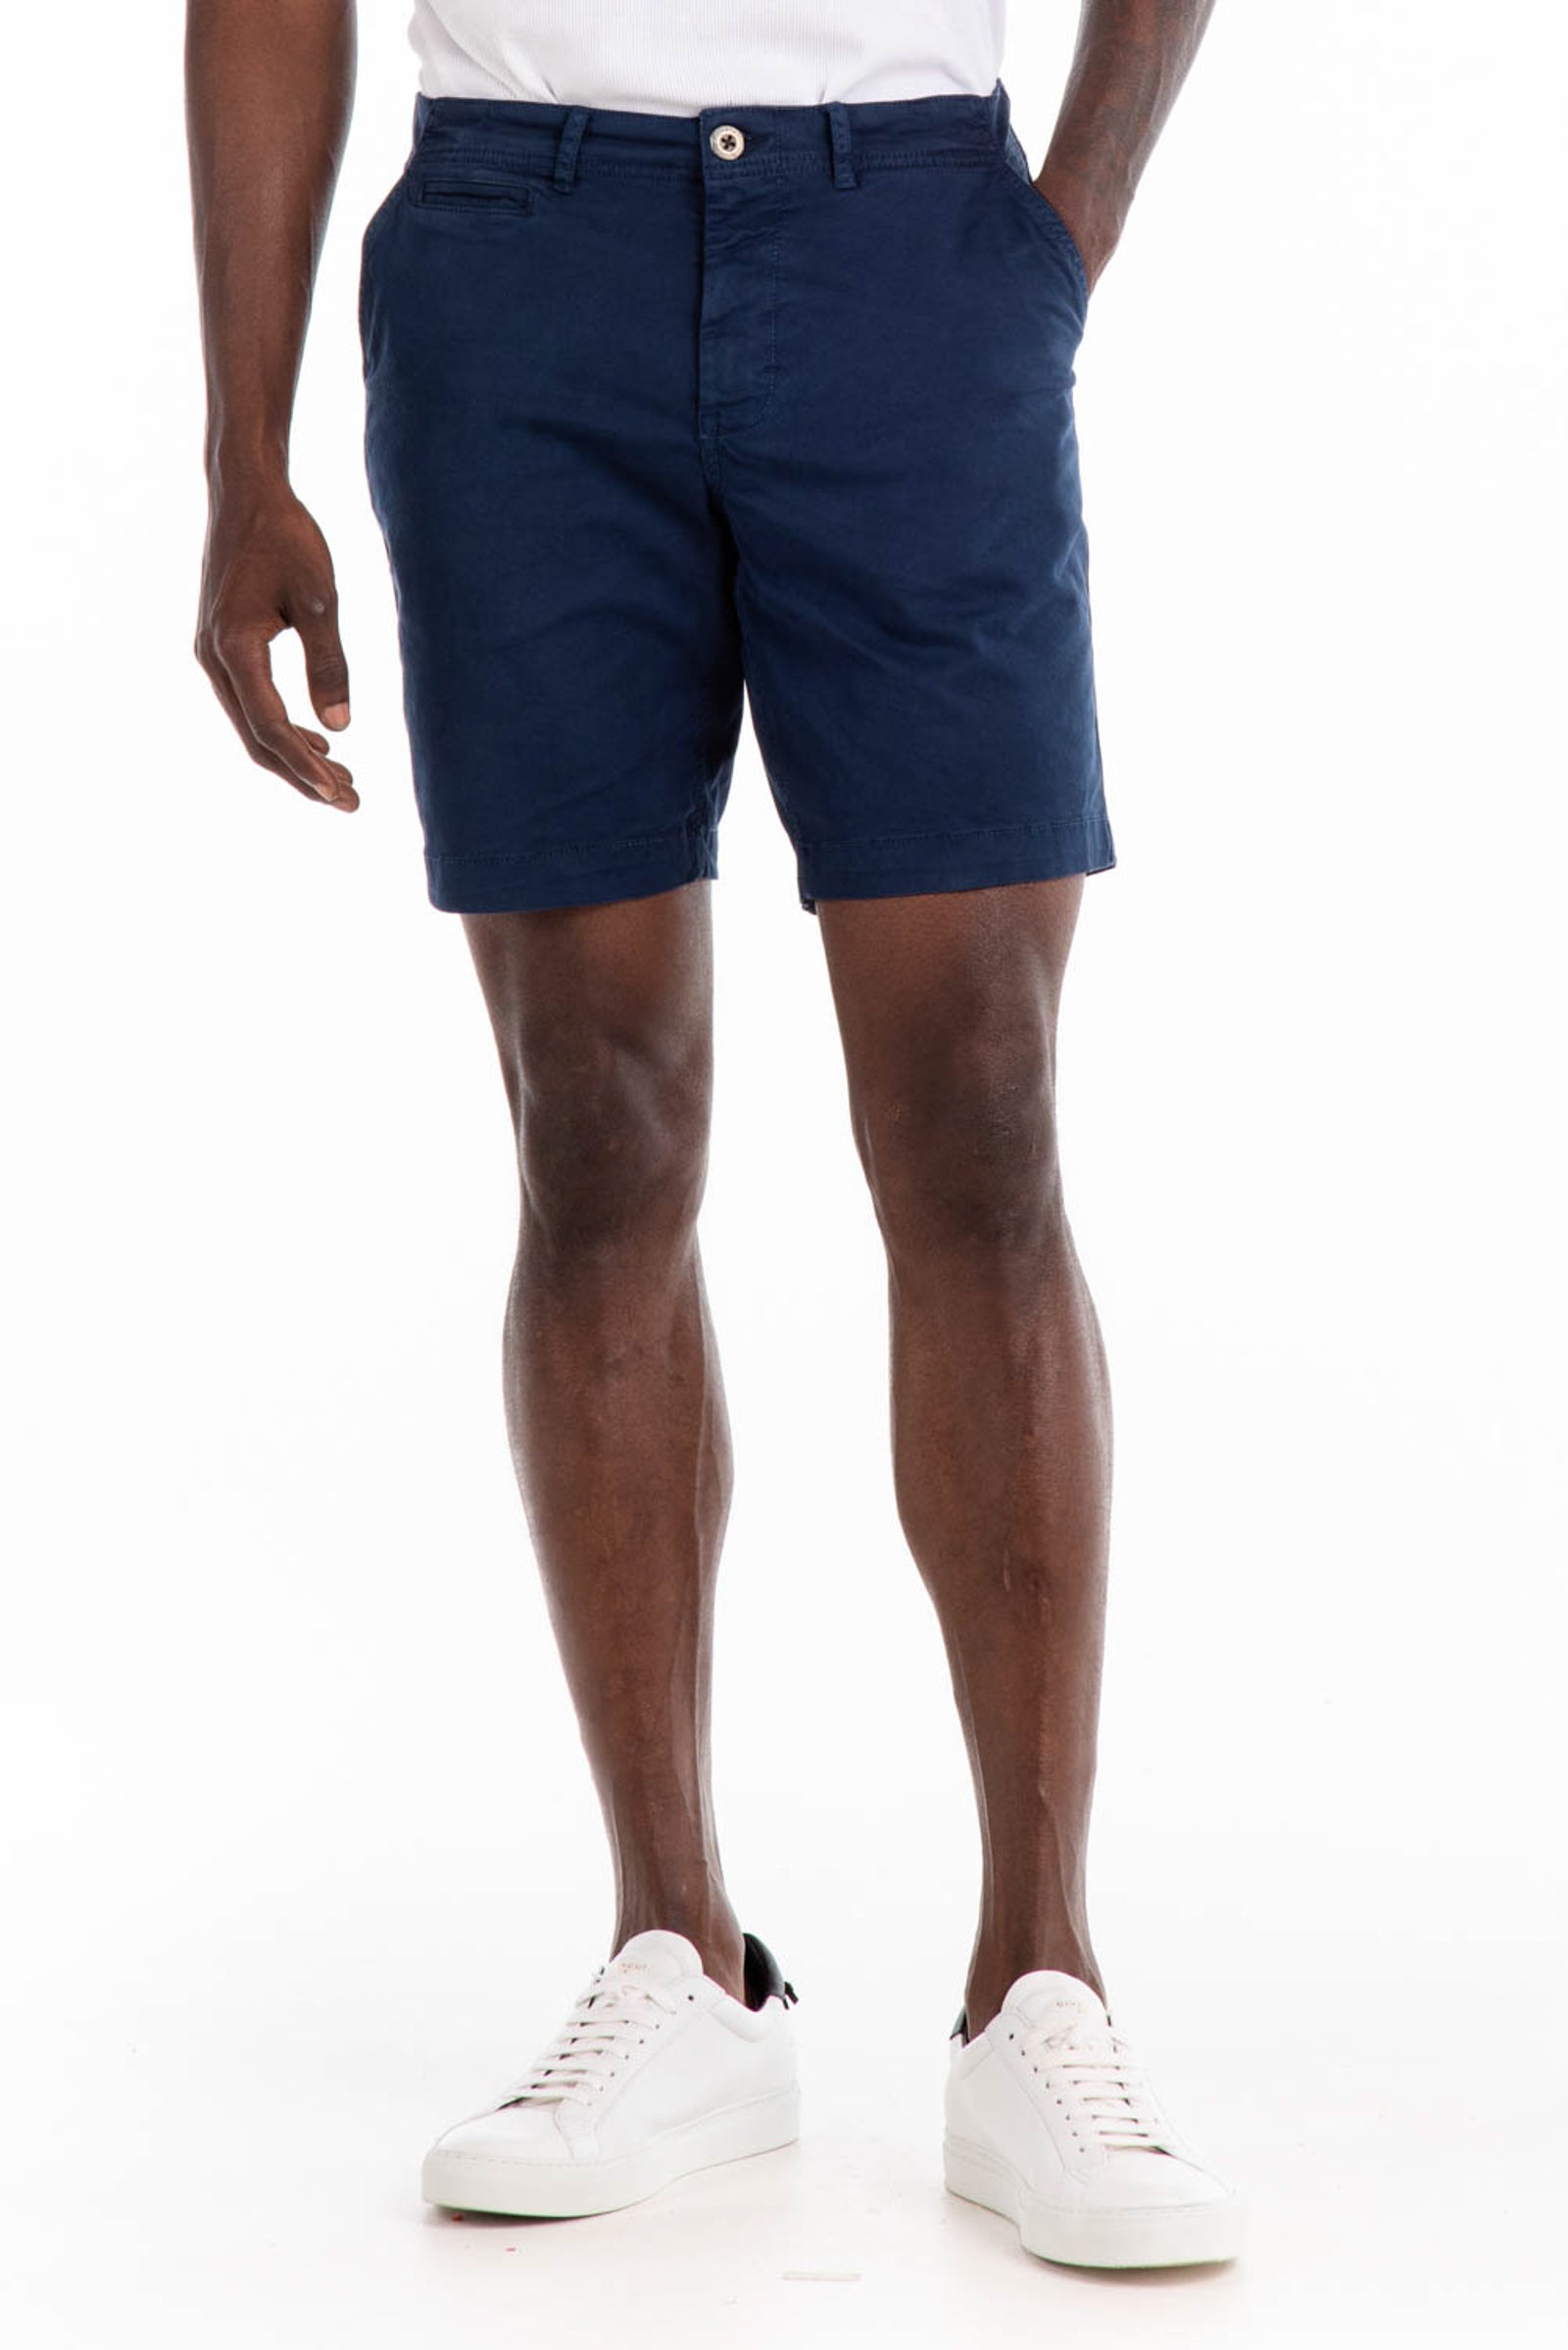 Original Paperbacks Walden Chino Short in Navy on Model Cropped Styled View